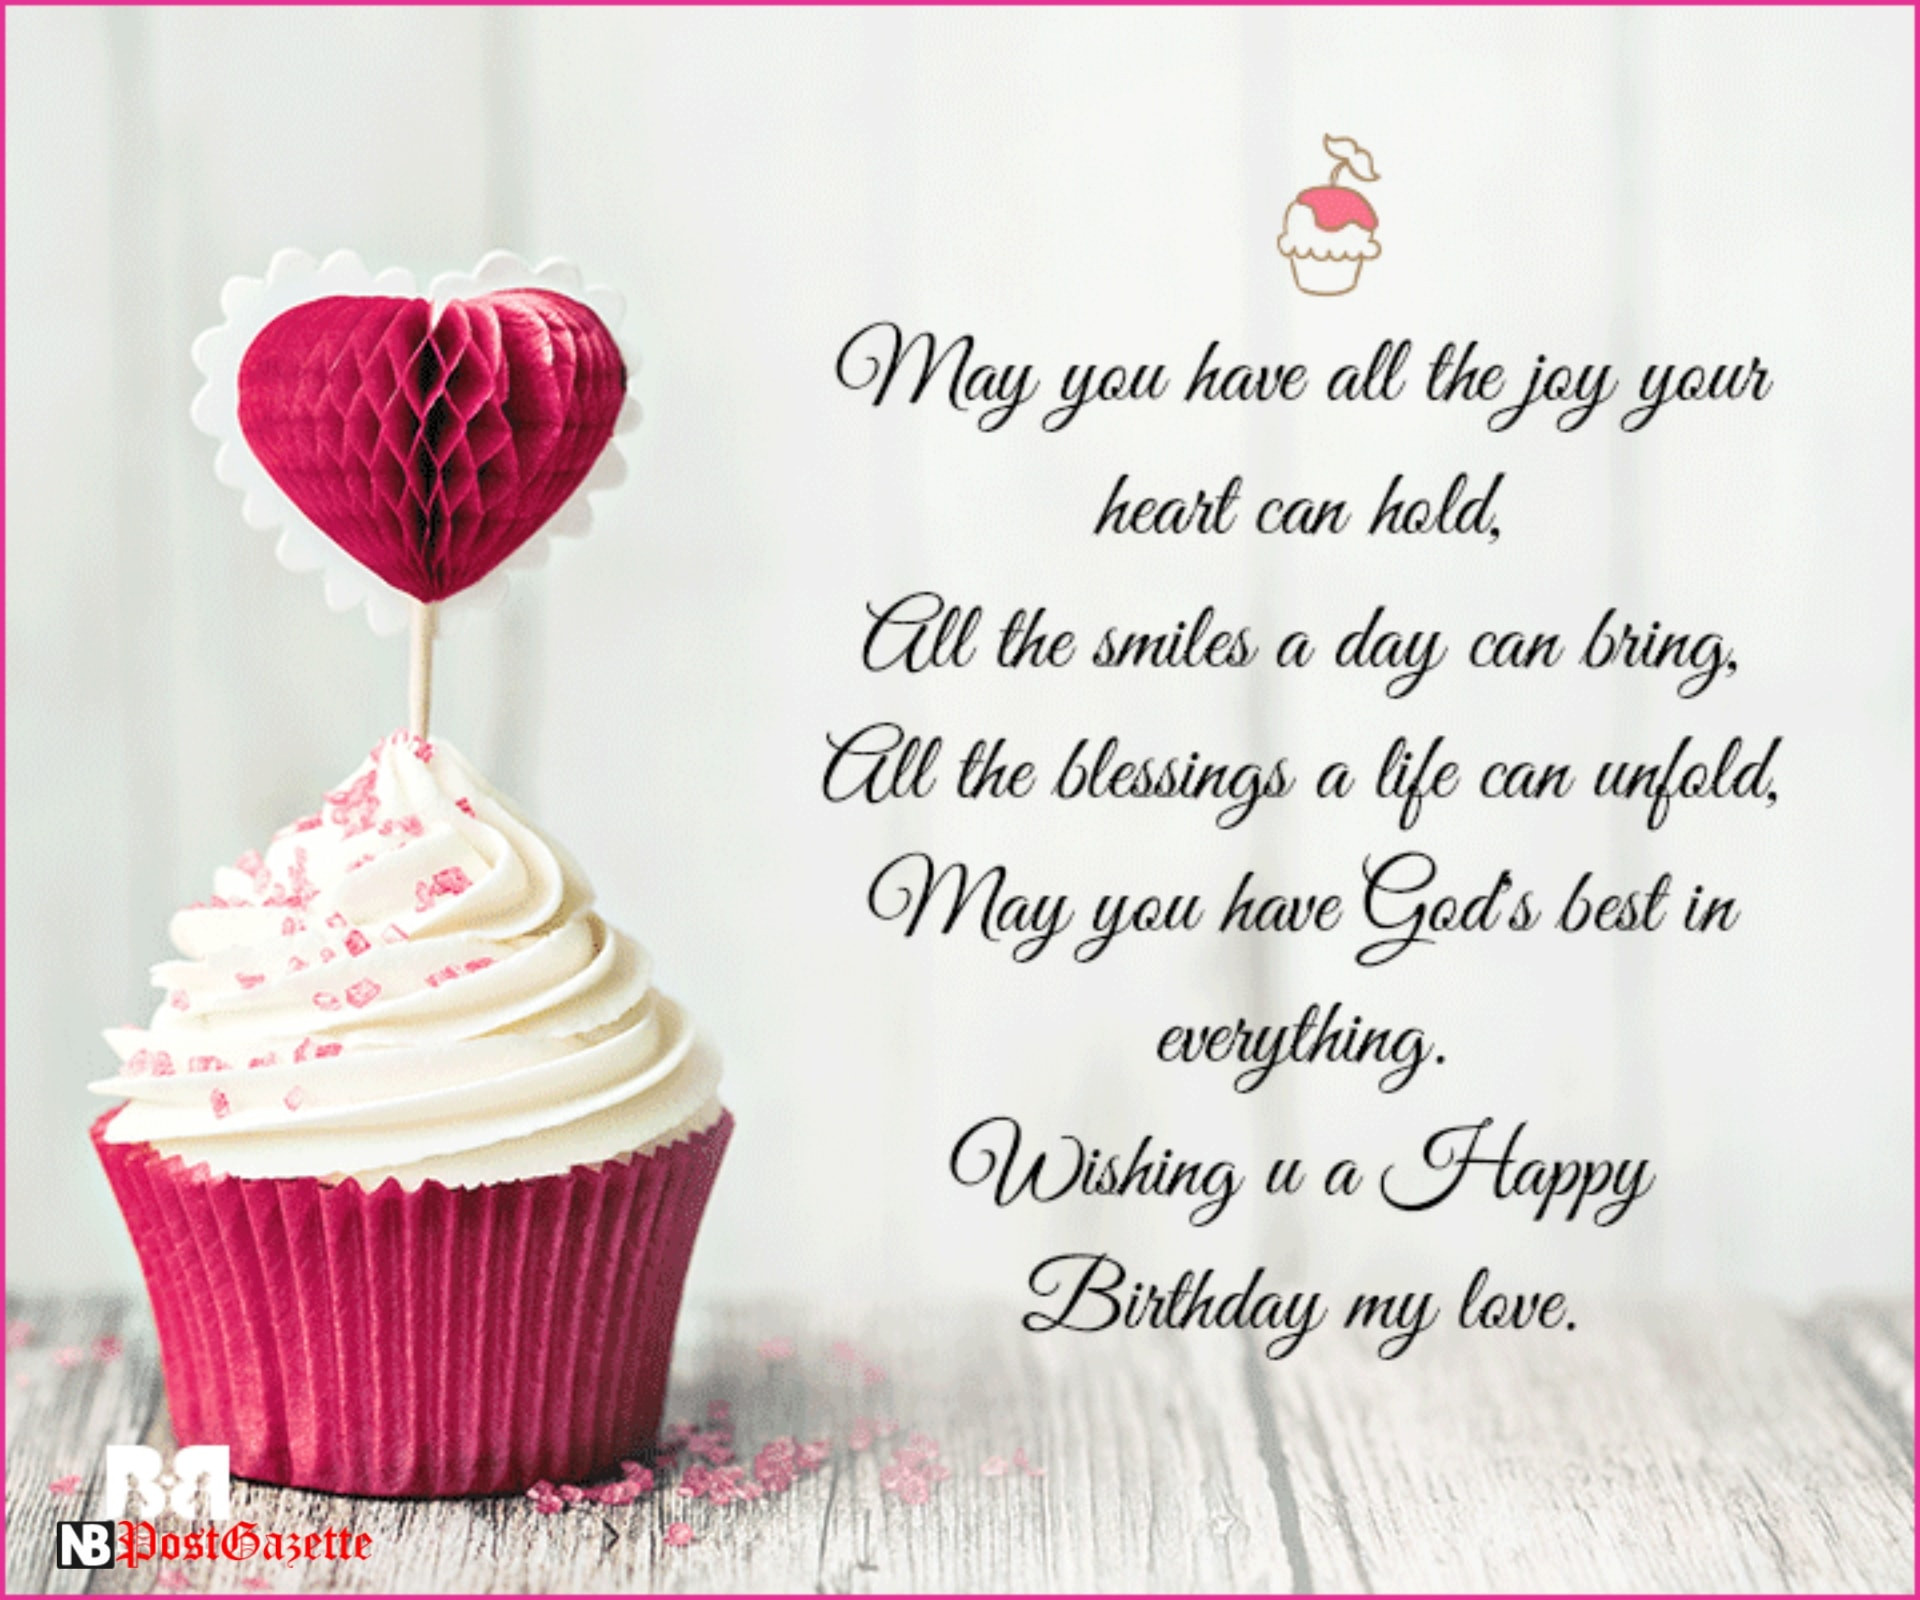 Www.birthday Wishes
 Top Best Happy Birthday Wishes SMS Quotes & Text Messages